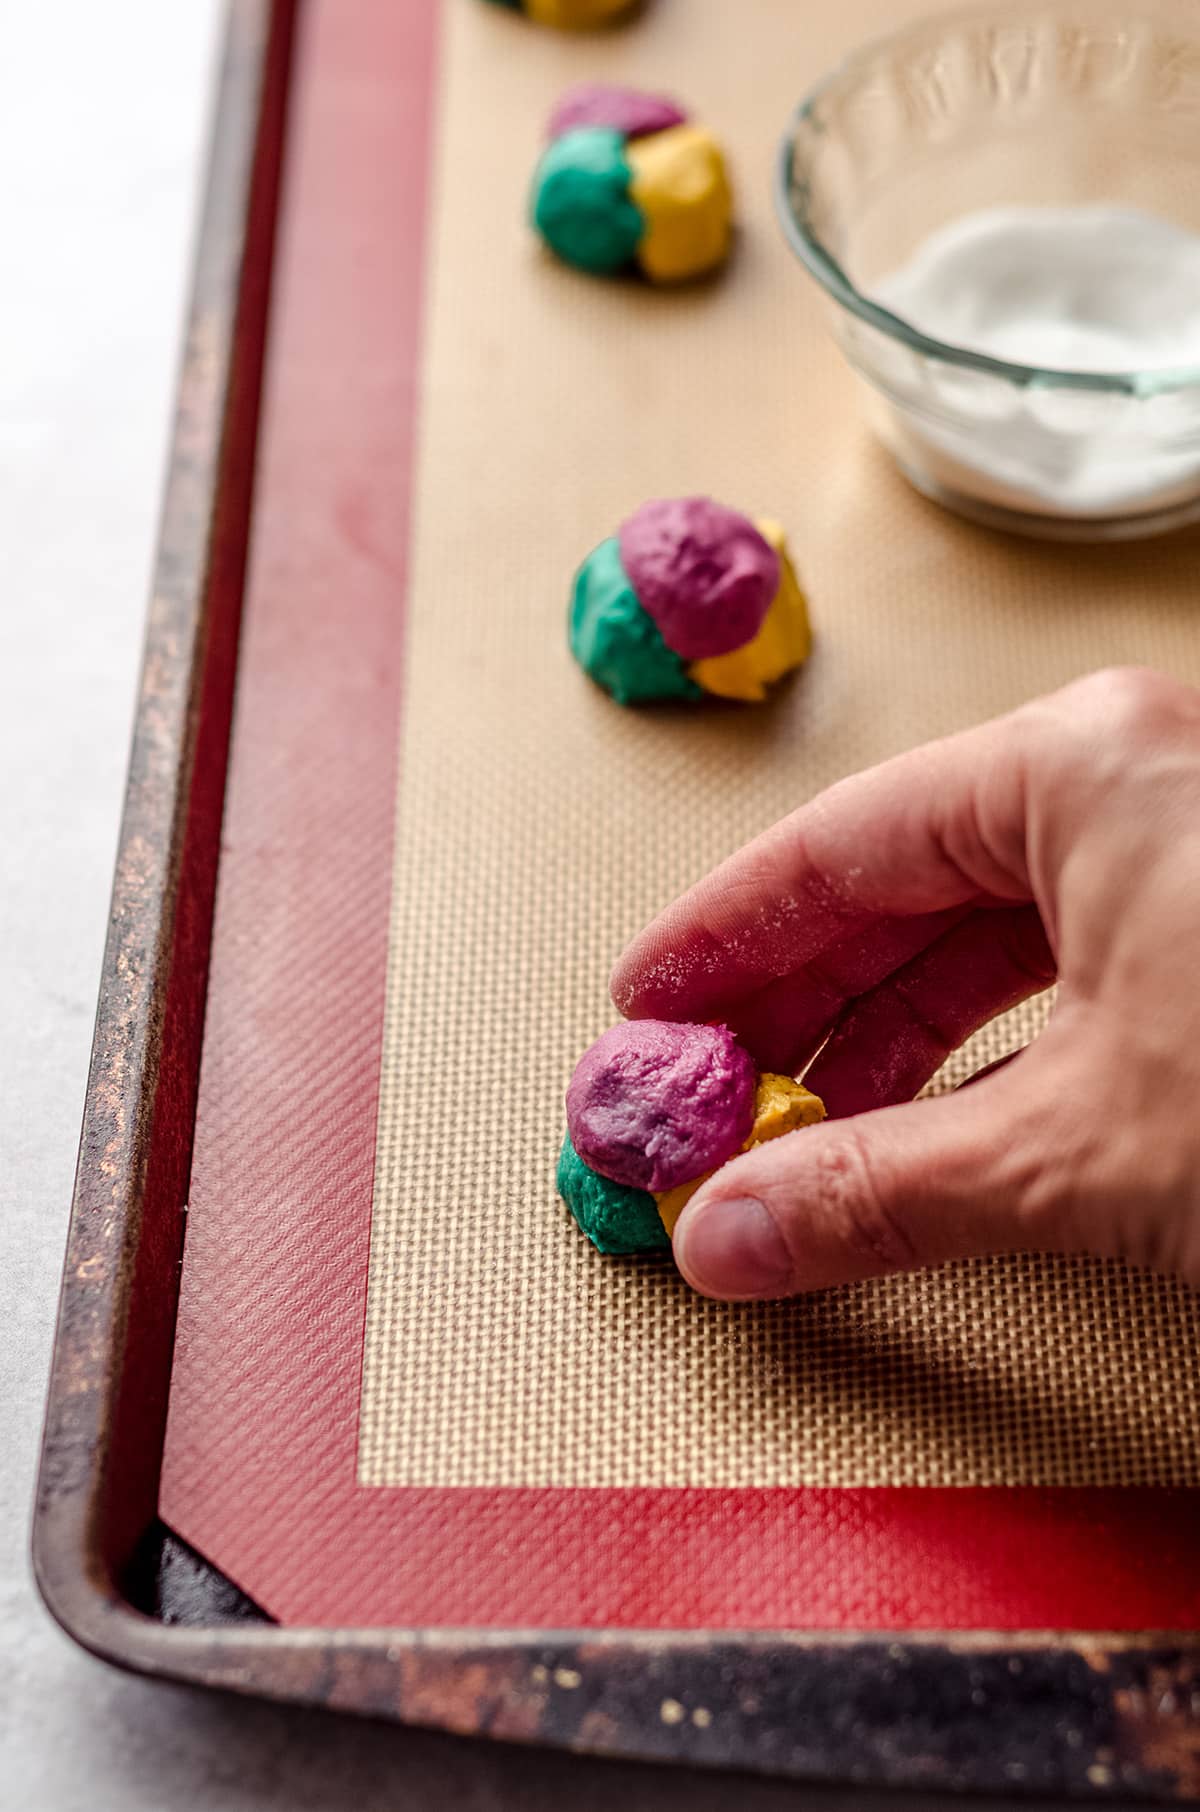 a hand shaping balls of colorful cookie dough on a baking sheet to make sally stitches cookies